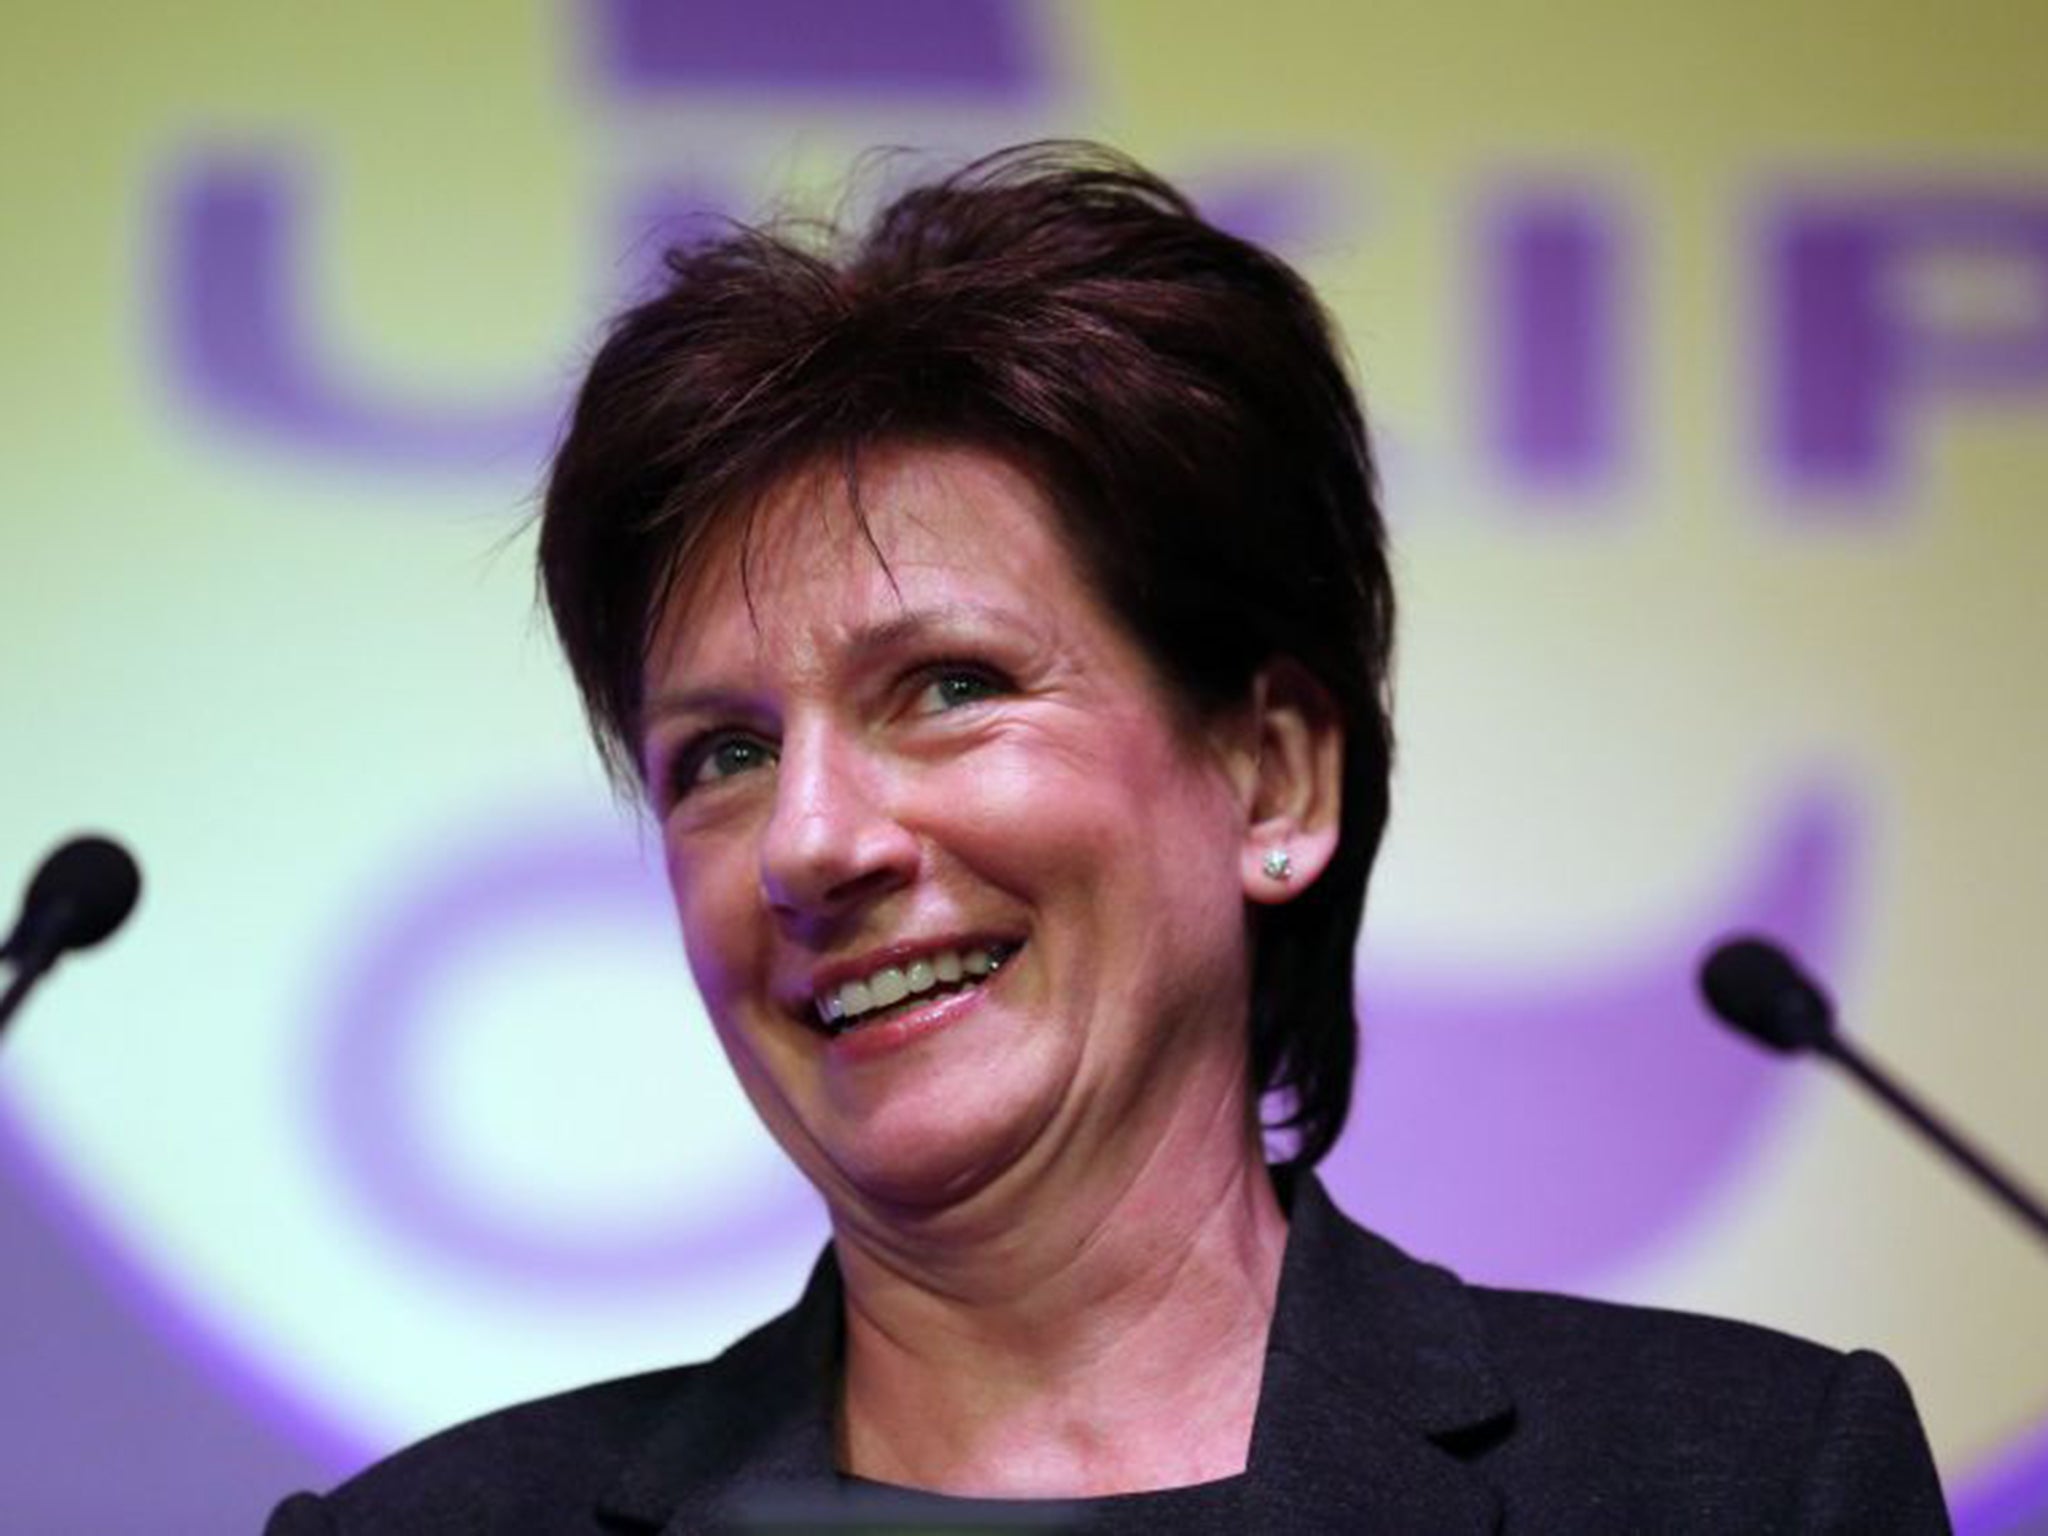 Diane James had hoped to defeat Conservative candidate Kit Malthouse in the constituency of North West Hampshire